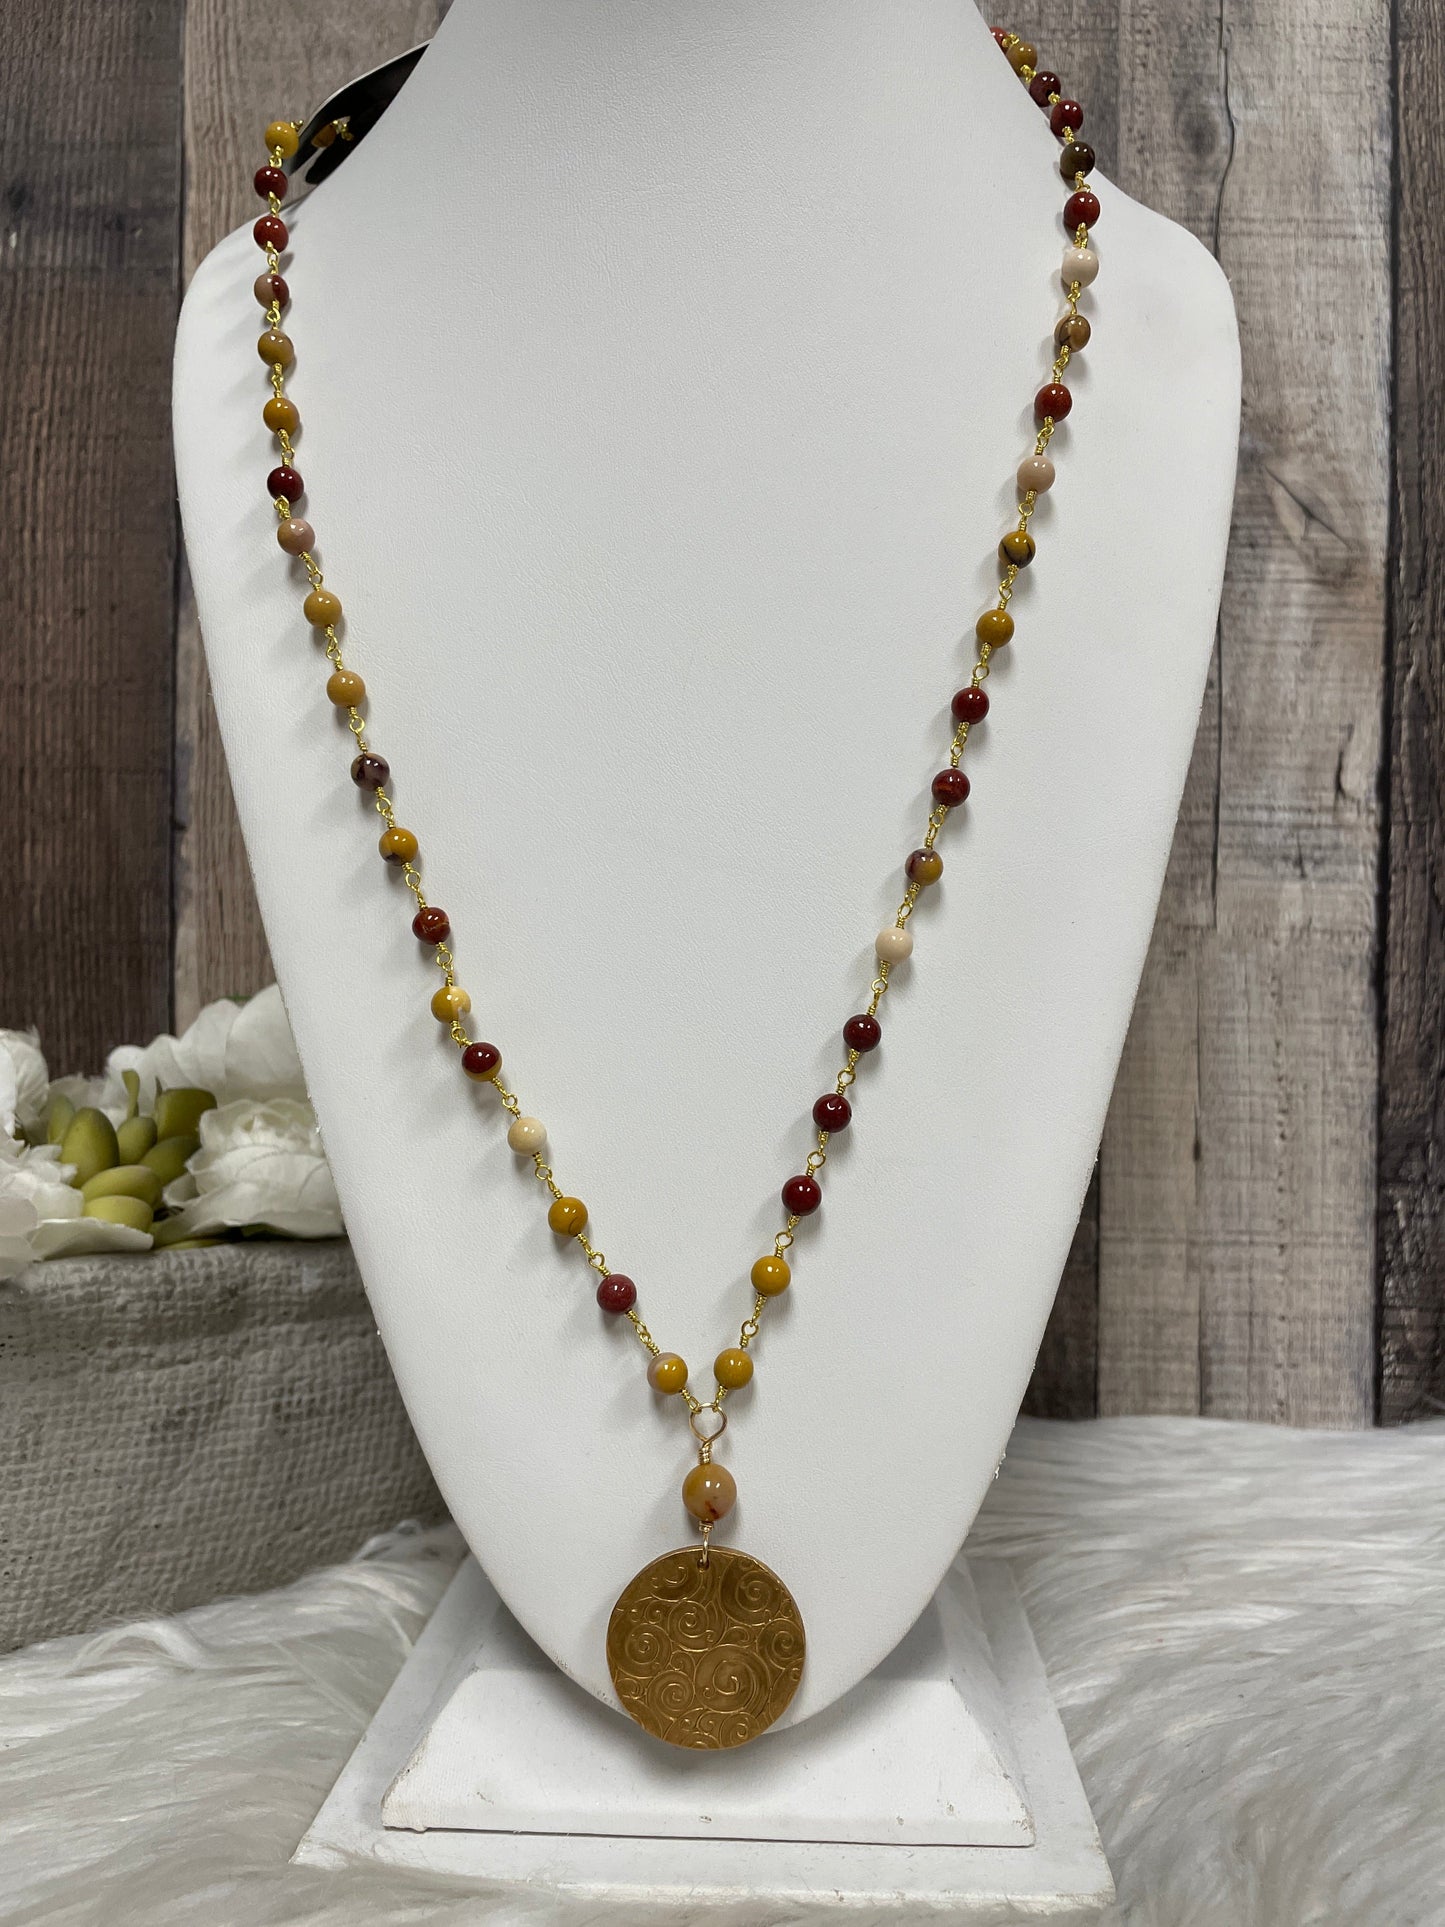 Necklace Strand By Cme